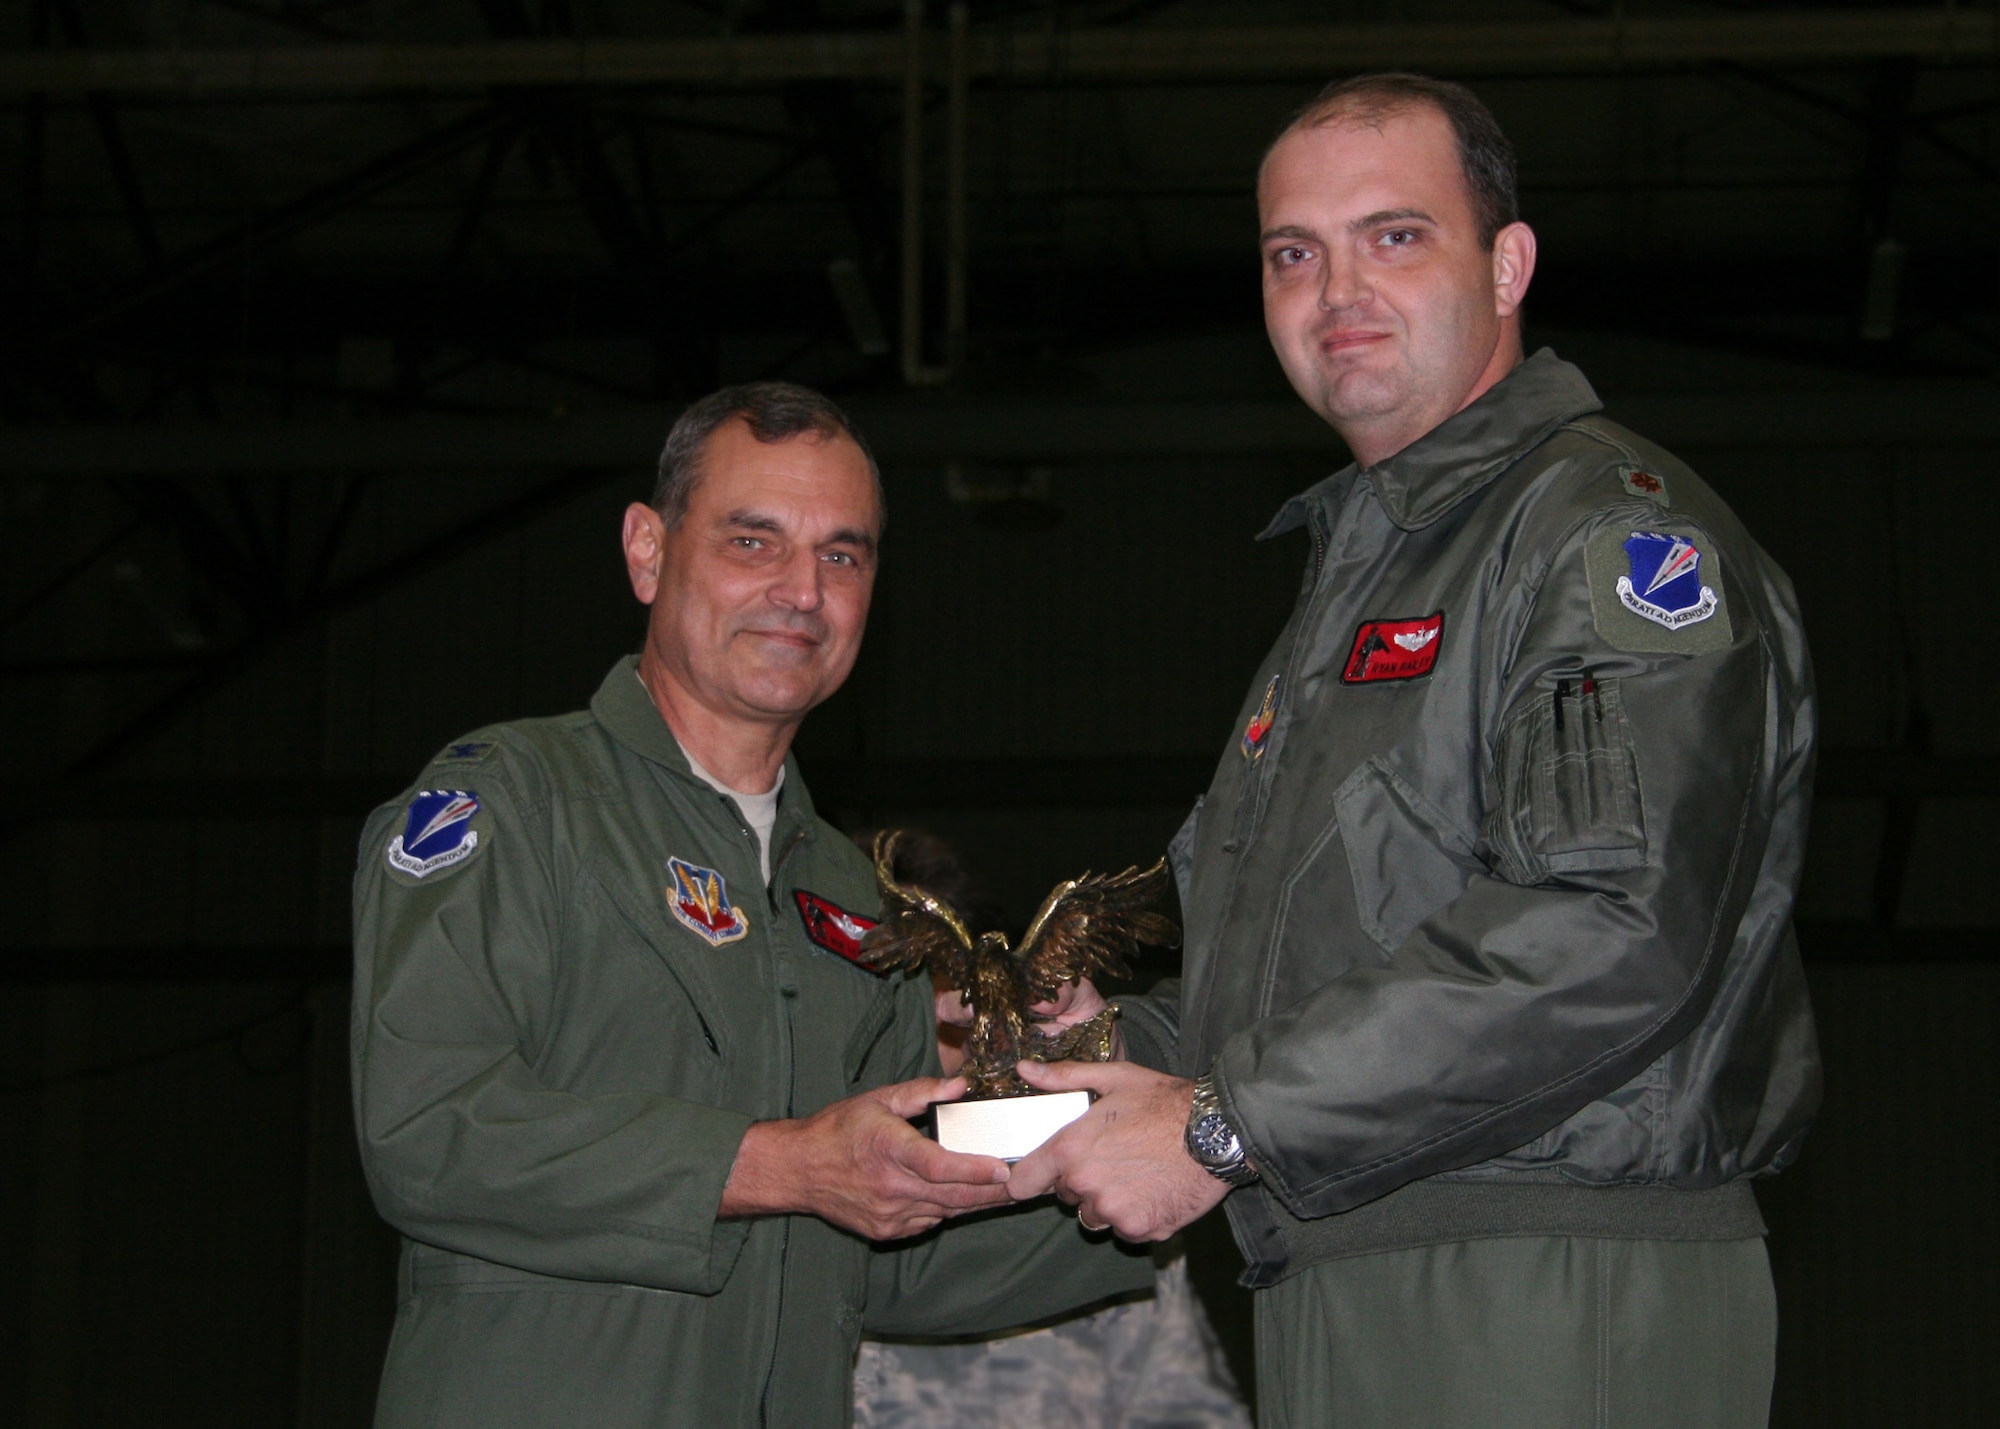 Maj Ryan "Poacher" Bailey, 131BW, receives an Eagle trophy from Col Robert Leeker, 131st Bomb Wing commander, at the 131st Outstanding Airman of the Year awards on Dec 5 at Whiteman Air Force Base.  Bailey was chosen as the 131st Outstanding Pilot of the Year-2009  (Air Force Photo by Tech Sgt Chris Boehlein   RELEASED) 